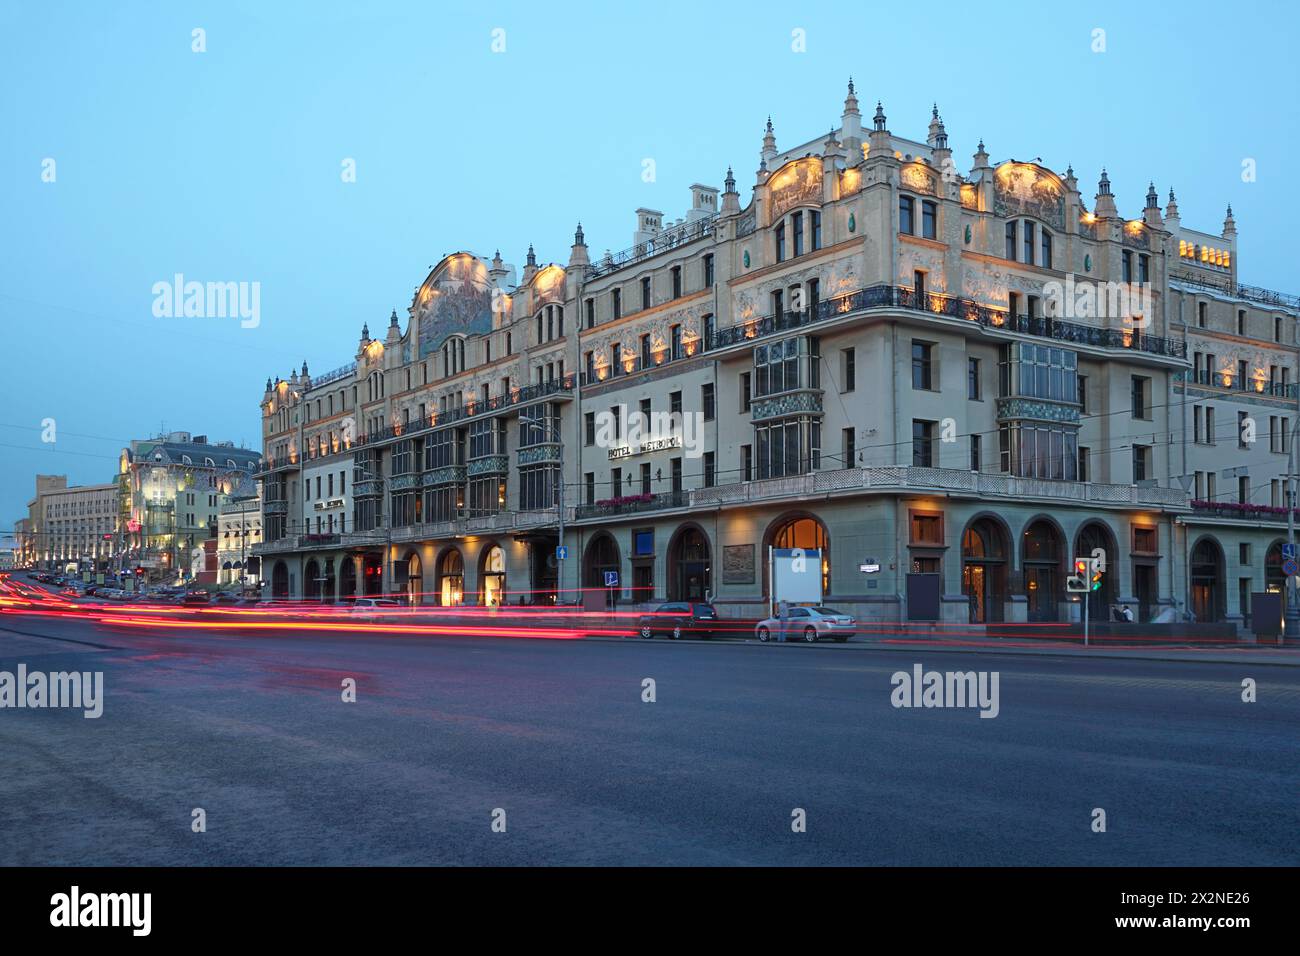 Hotel Metropol at evening in Moscow, Russia. Building was constructed in 1899-1905. Stock Photo